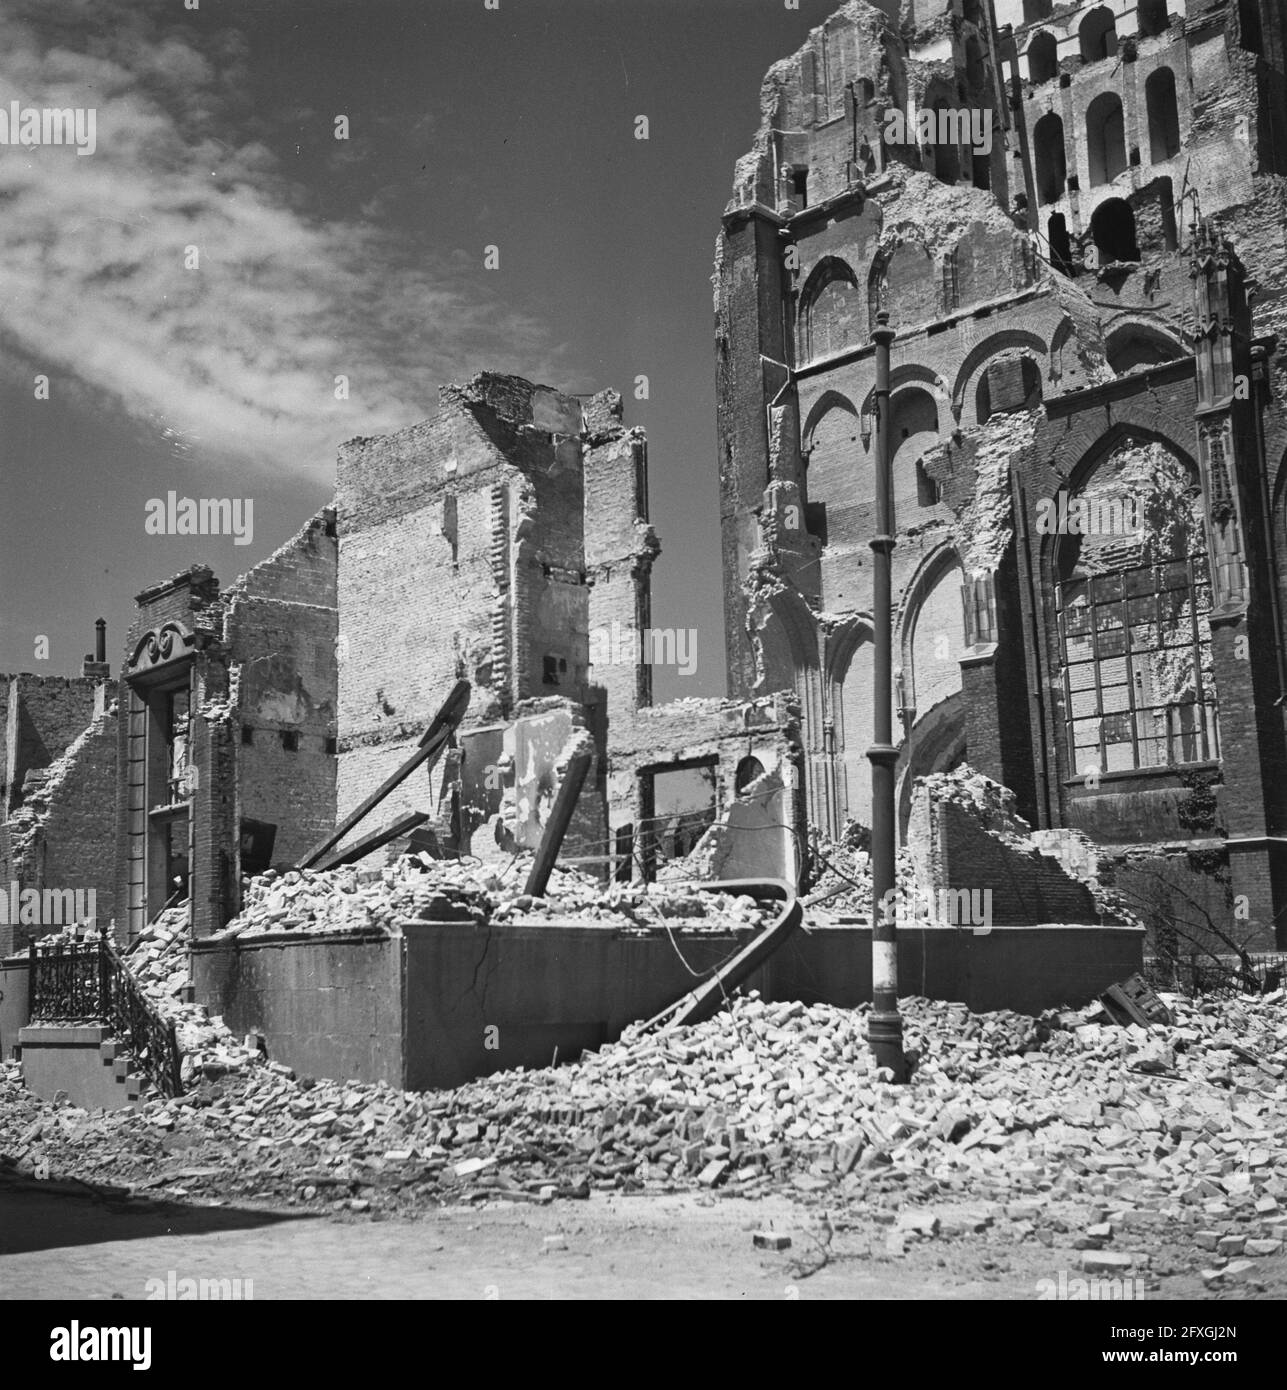 [Destroyed Church], June 1945, buildings, World War II, destruction, The Netherlands, 20th century press agency photo, news to remember, documentary, historic photography 1945-1990, visual stories, human history of the Twentieth Century, capturing moments in time Stock Photo